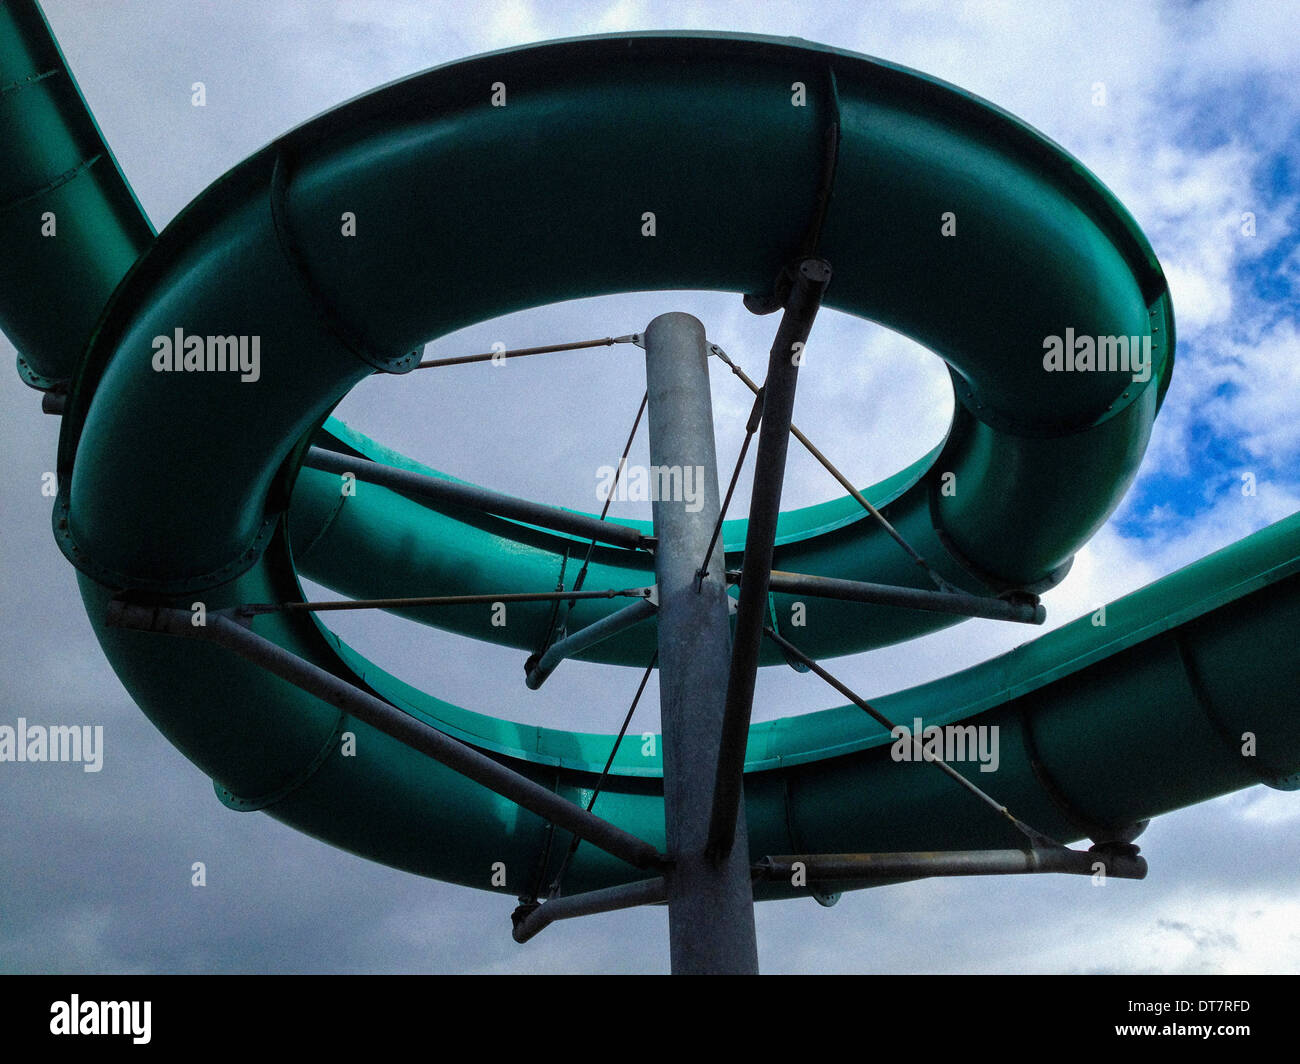 Outdoor structure of spiral water slide at swimming pool Stock Photo